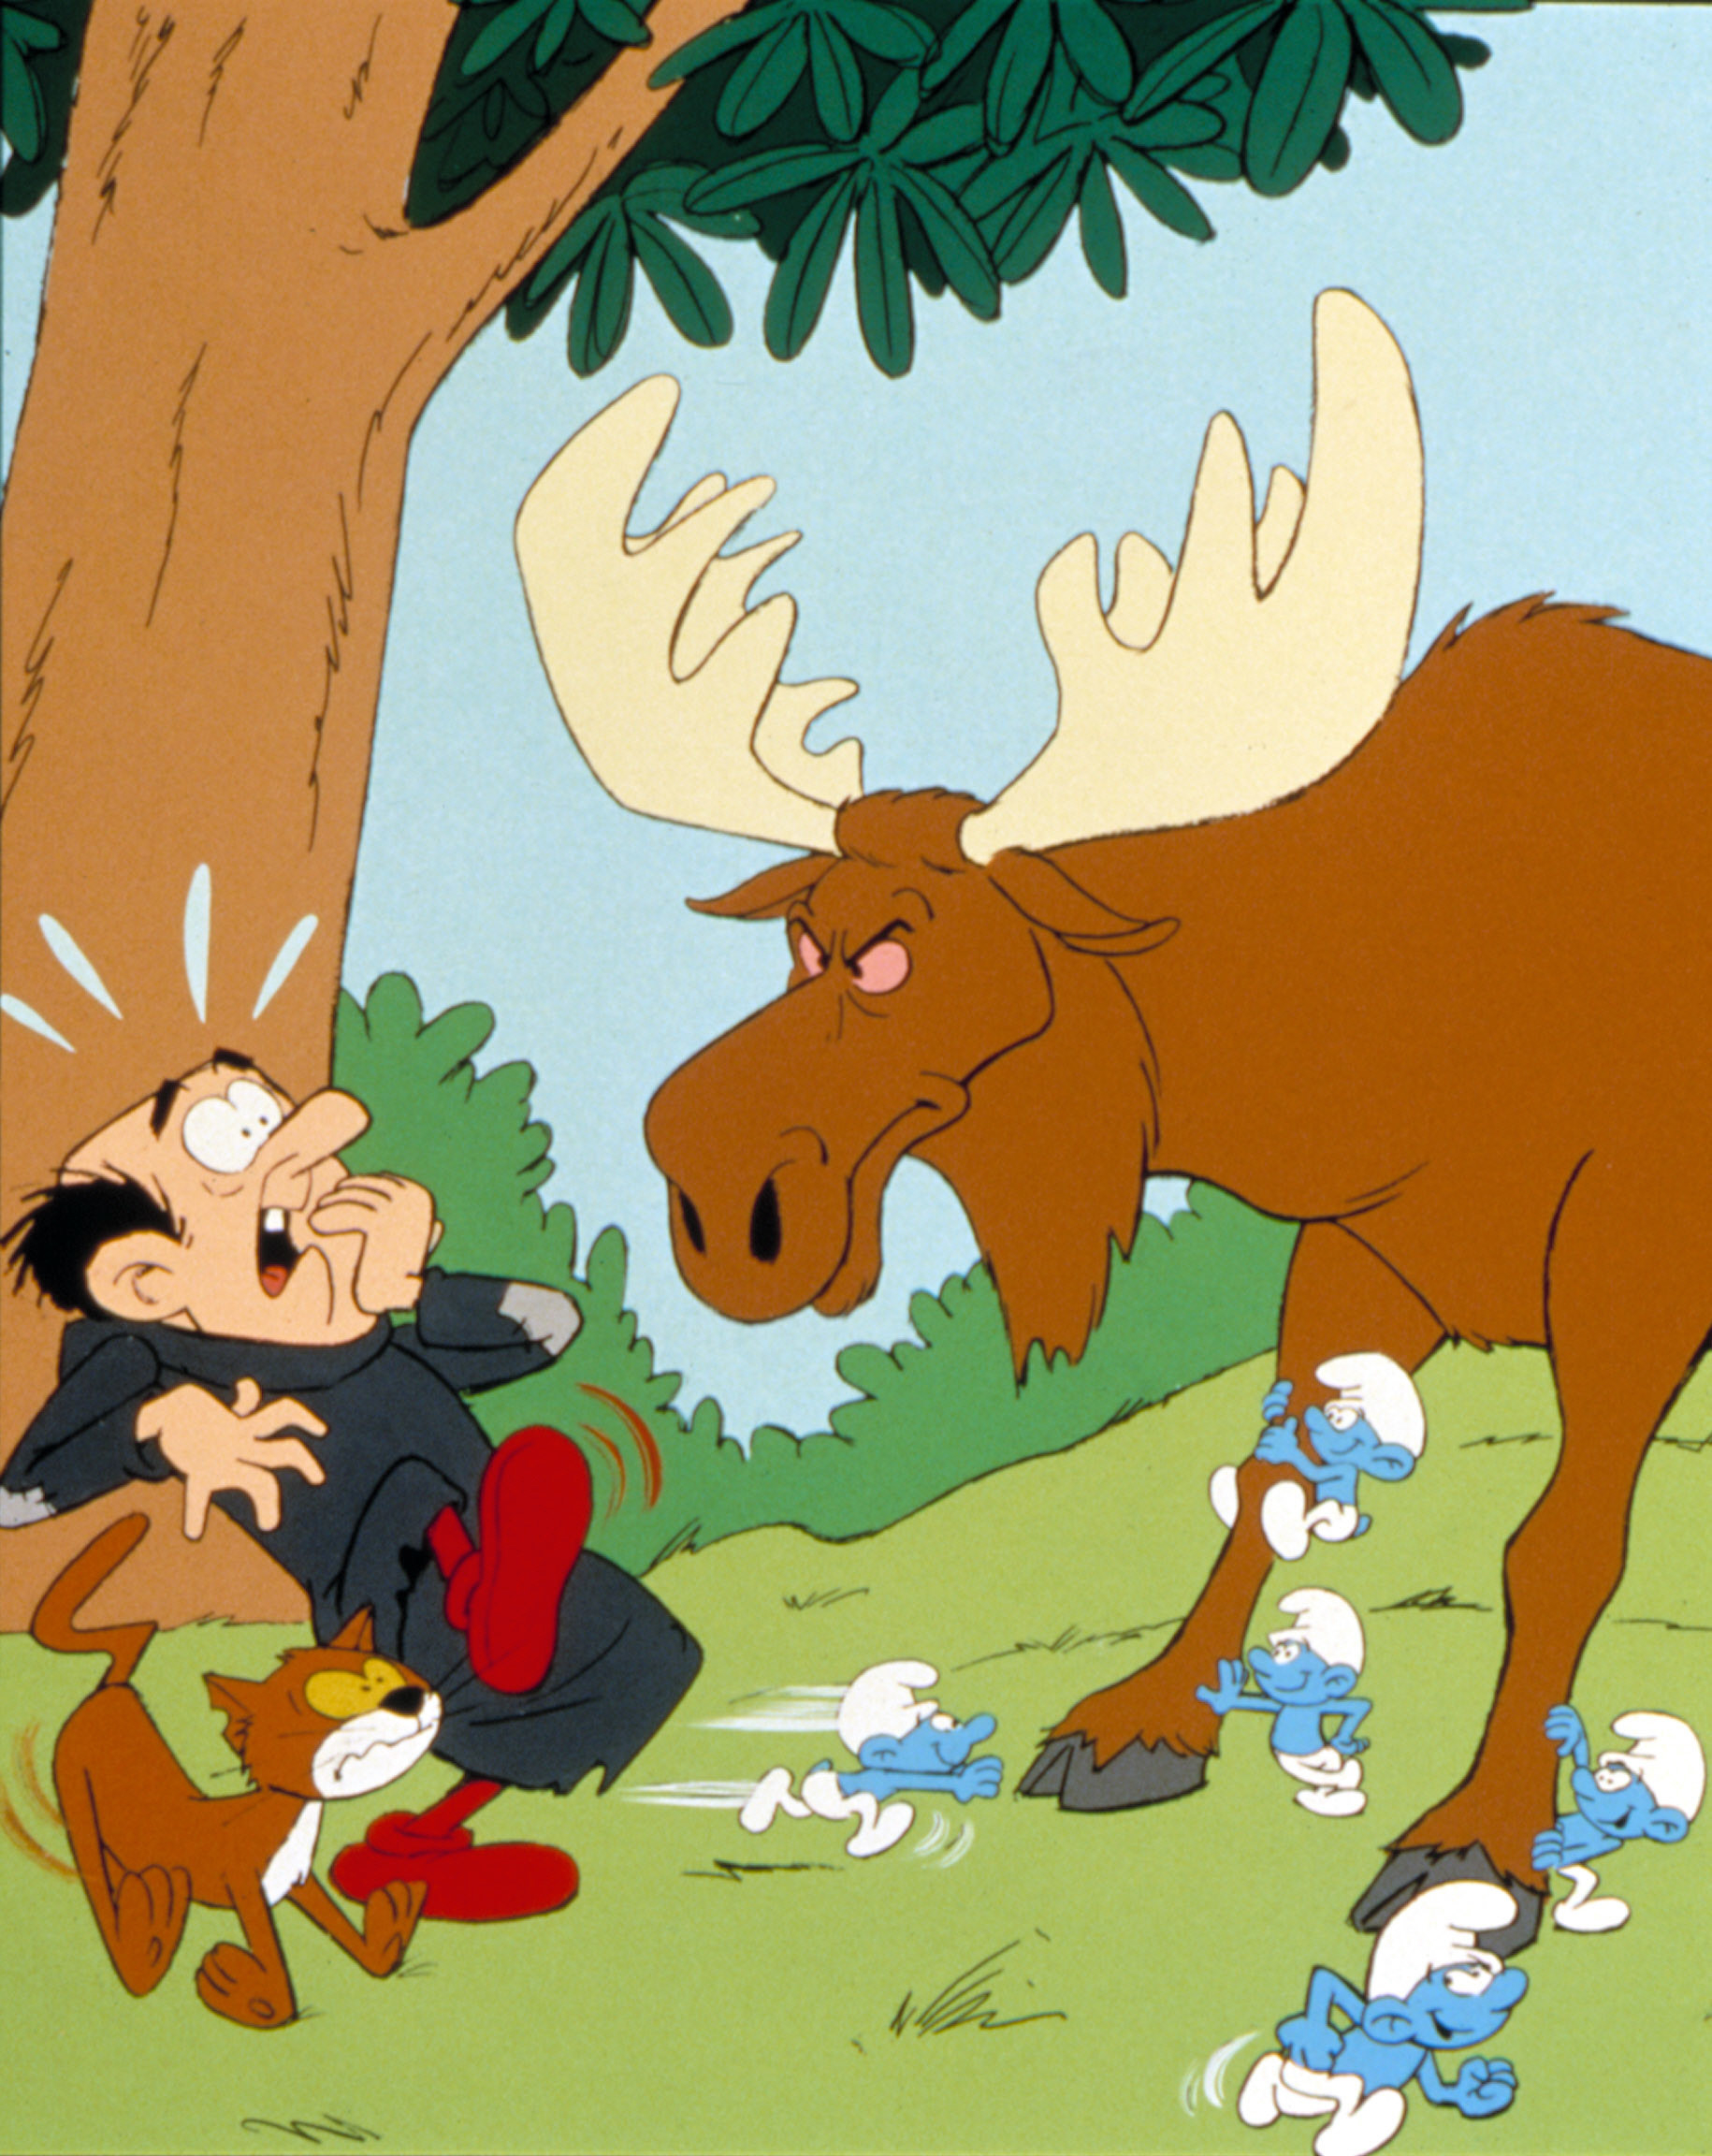 Gargamel and Azrael with a moose in The Smurfs